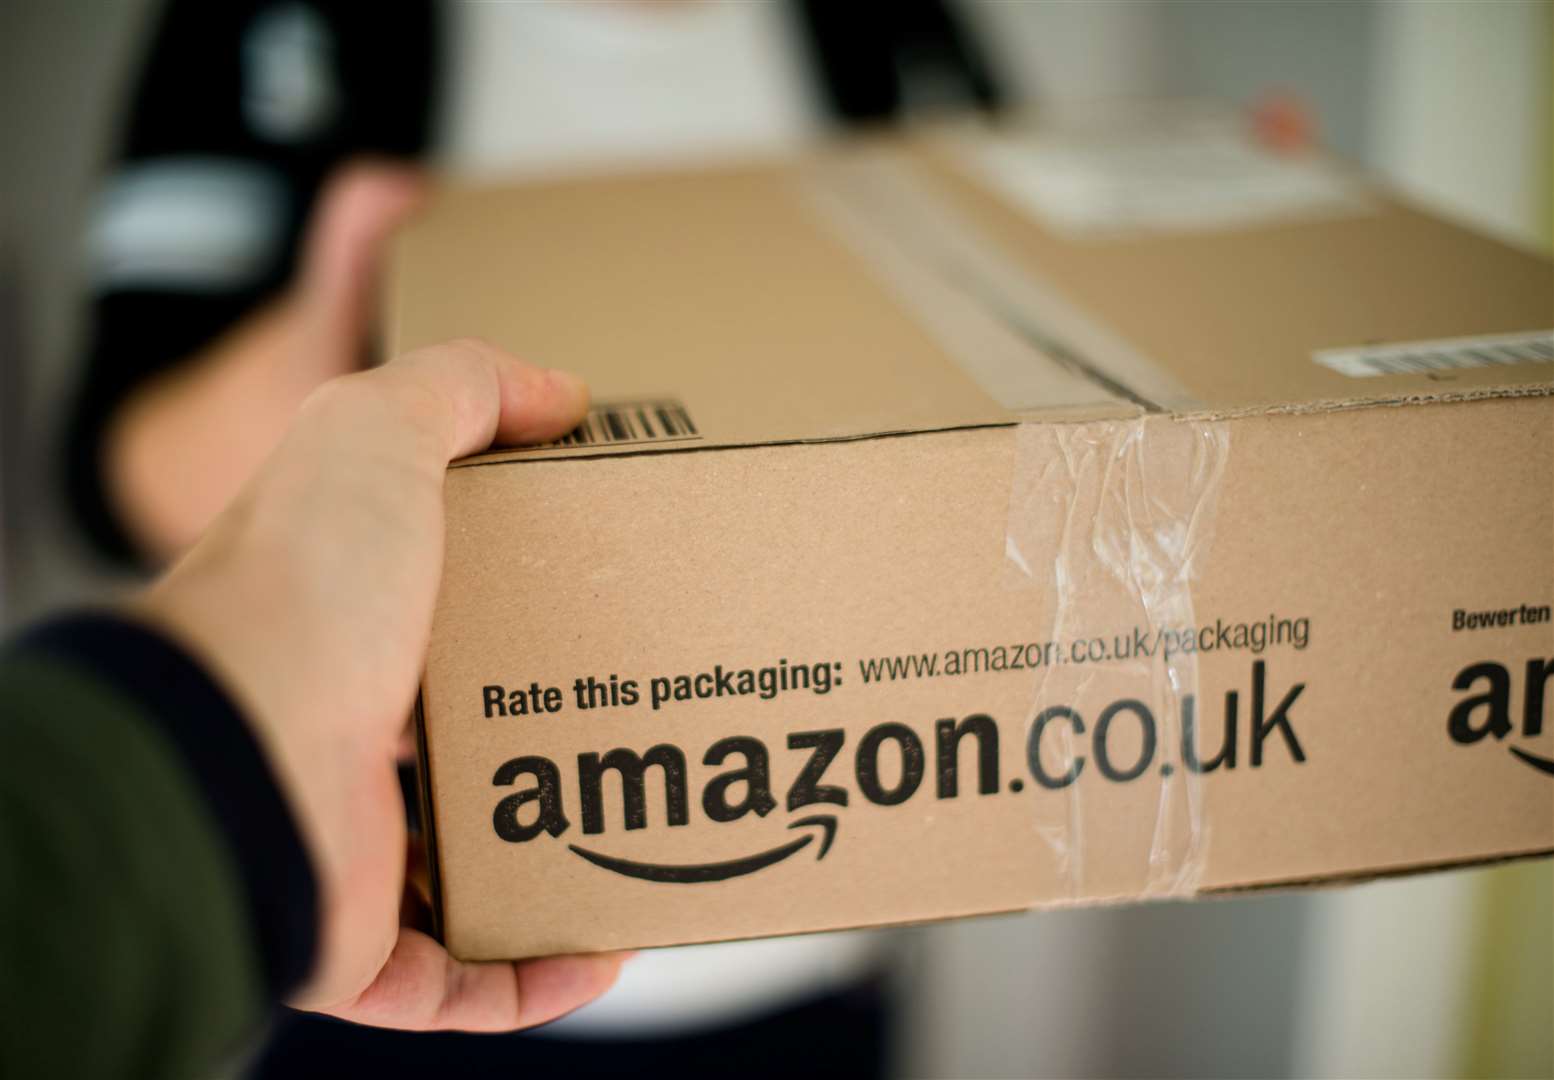 Stephen Romain worked for Amazon as a delivery driver and says he was stitched up by the global retailer. Image: iStock